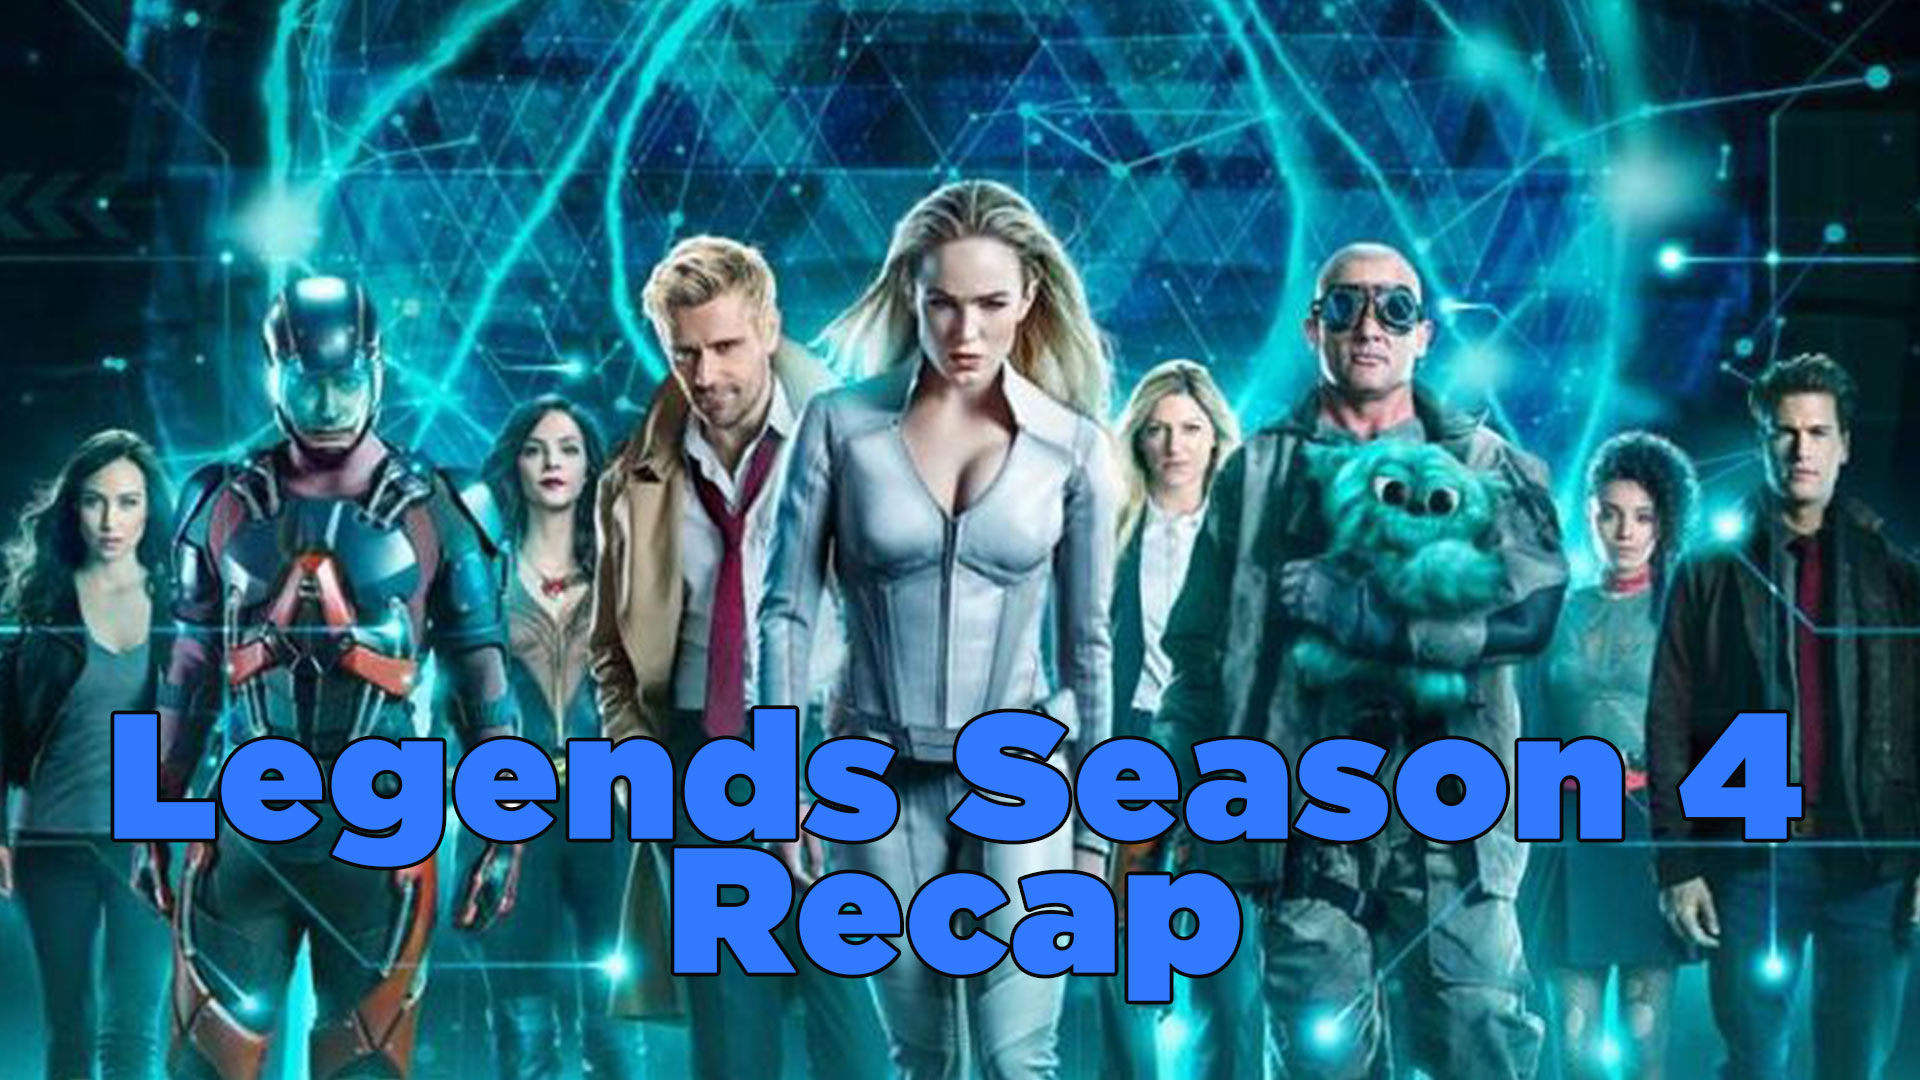 What You Need to Know Before Watching Legends of Tomorrow